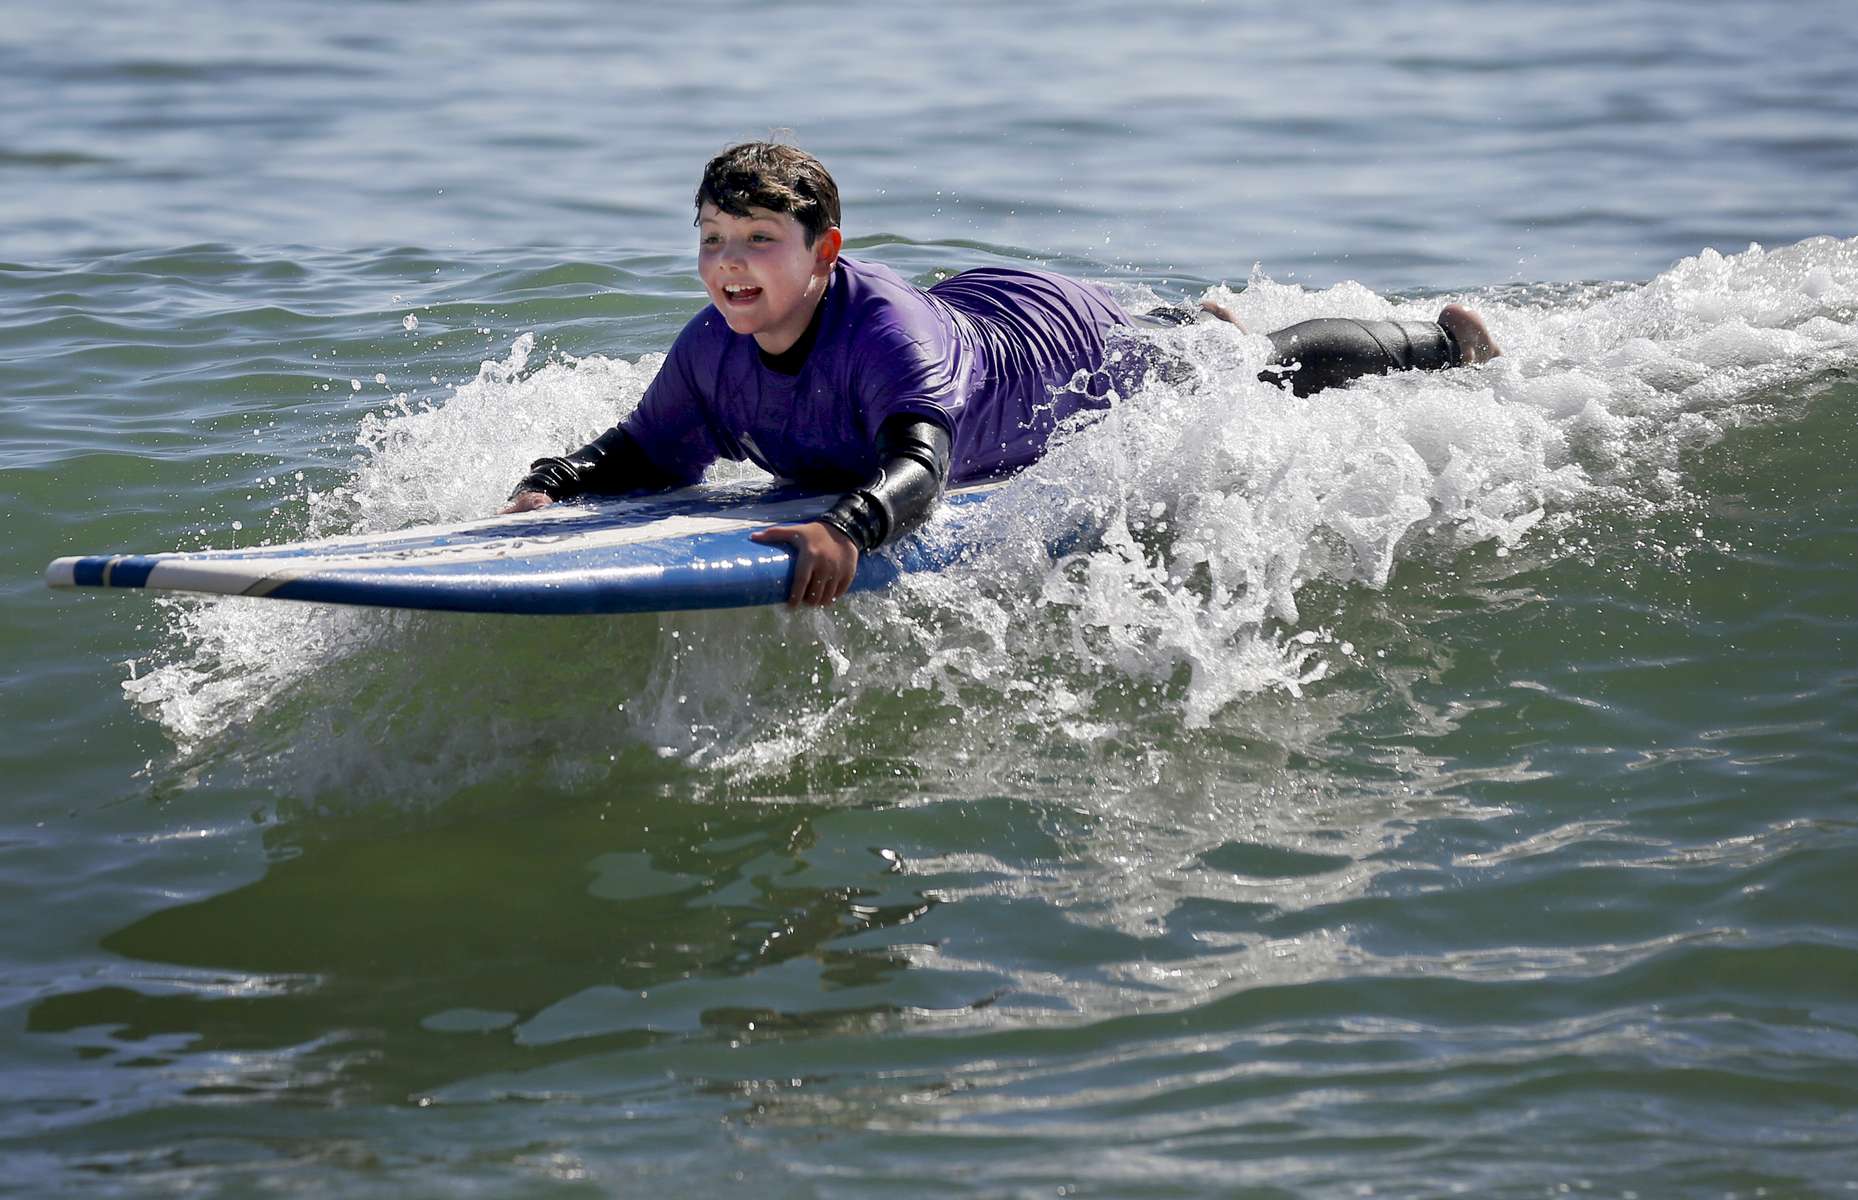 James Kaplan, 8, surfs a wave during a family trip Oct. 9, 1016 sponsored by Focus on Cancer in Santa Cruz, Calif. Sara, who survived kidney cancer, was sponsored by the company which works with cancer patients and survivors and their loved ones to provide support and special trips to reduce social isolation. 